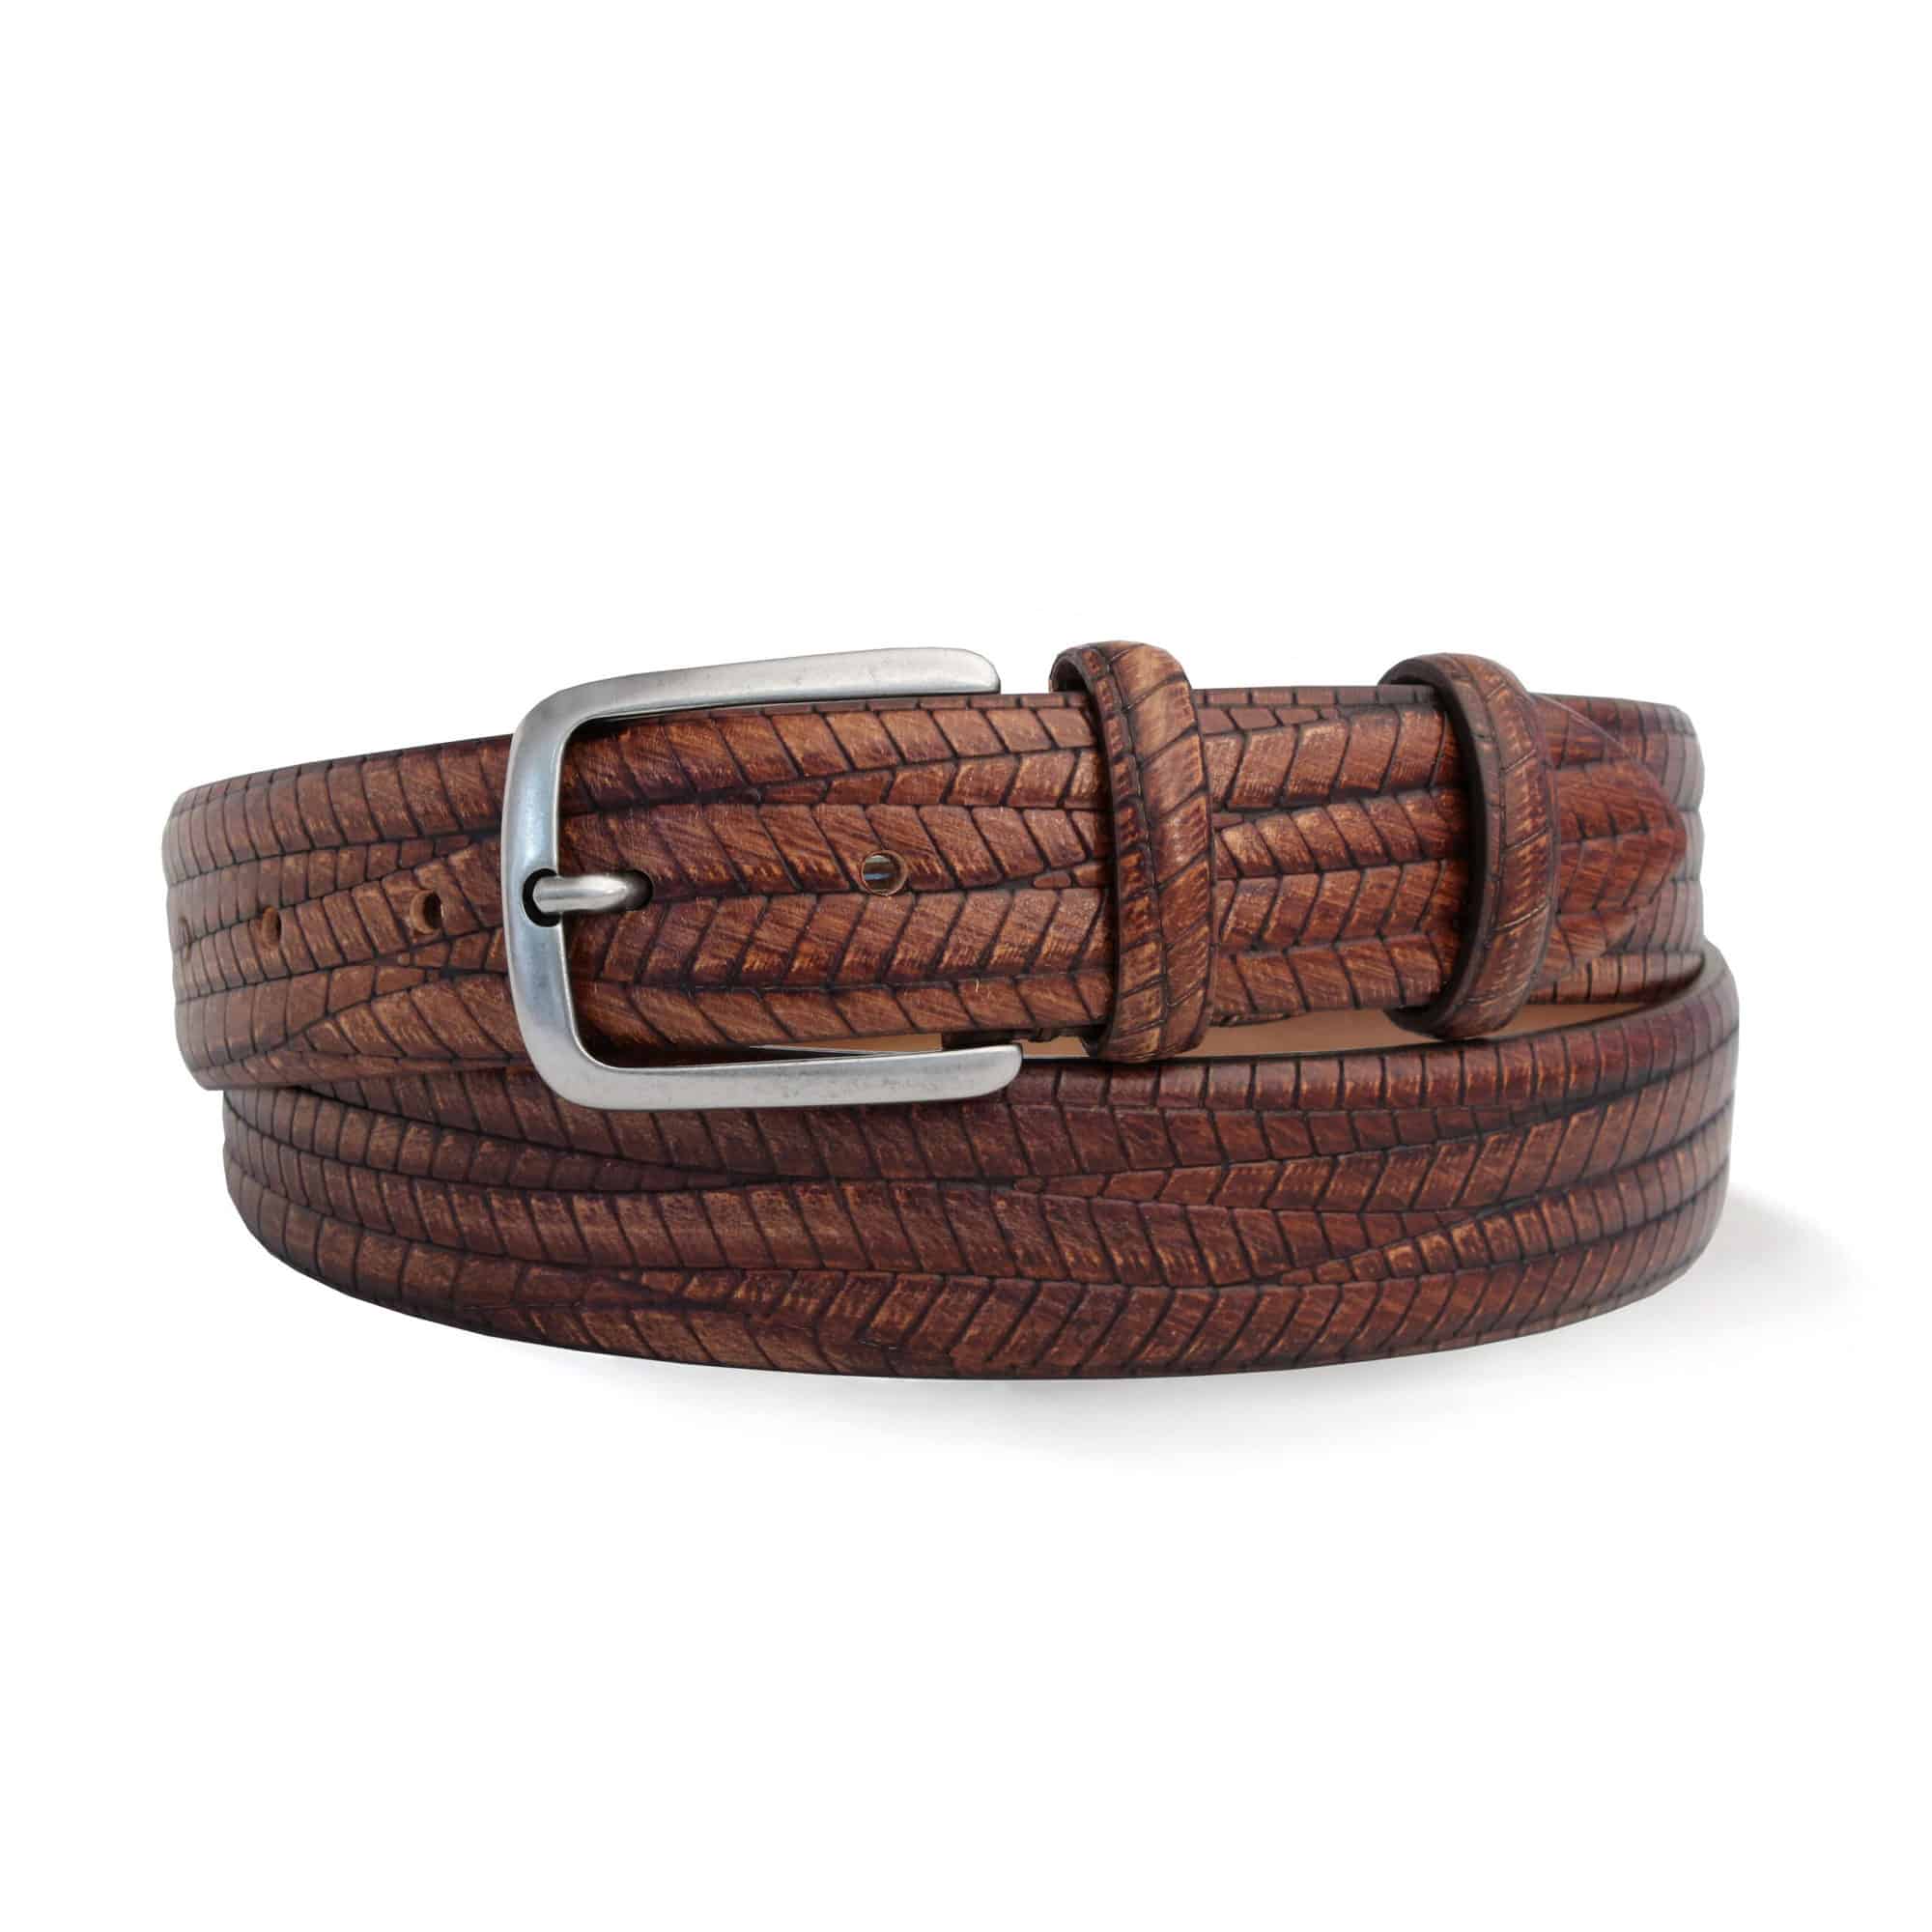 Brown Belt by Smart Clothes York Yorkshire